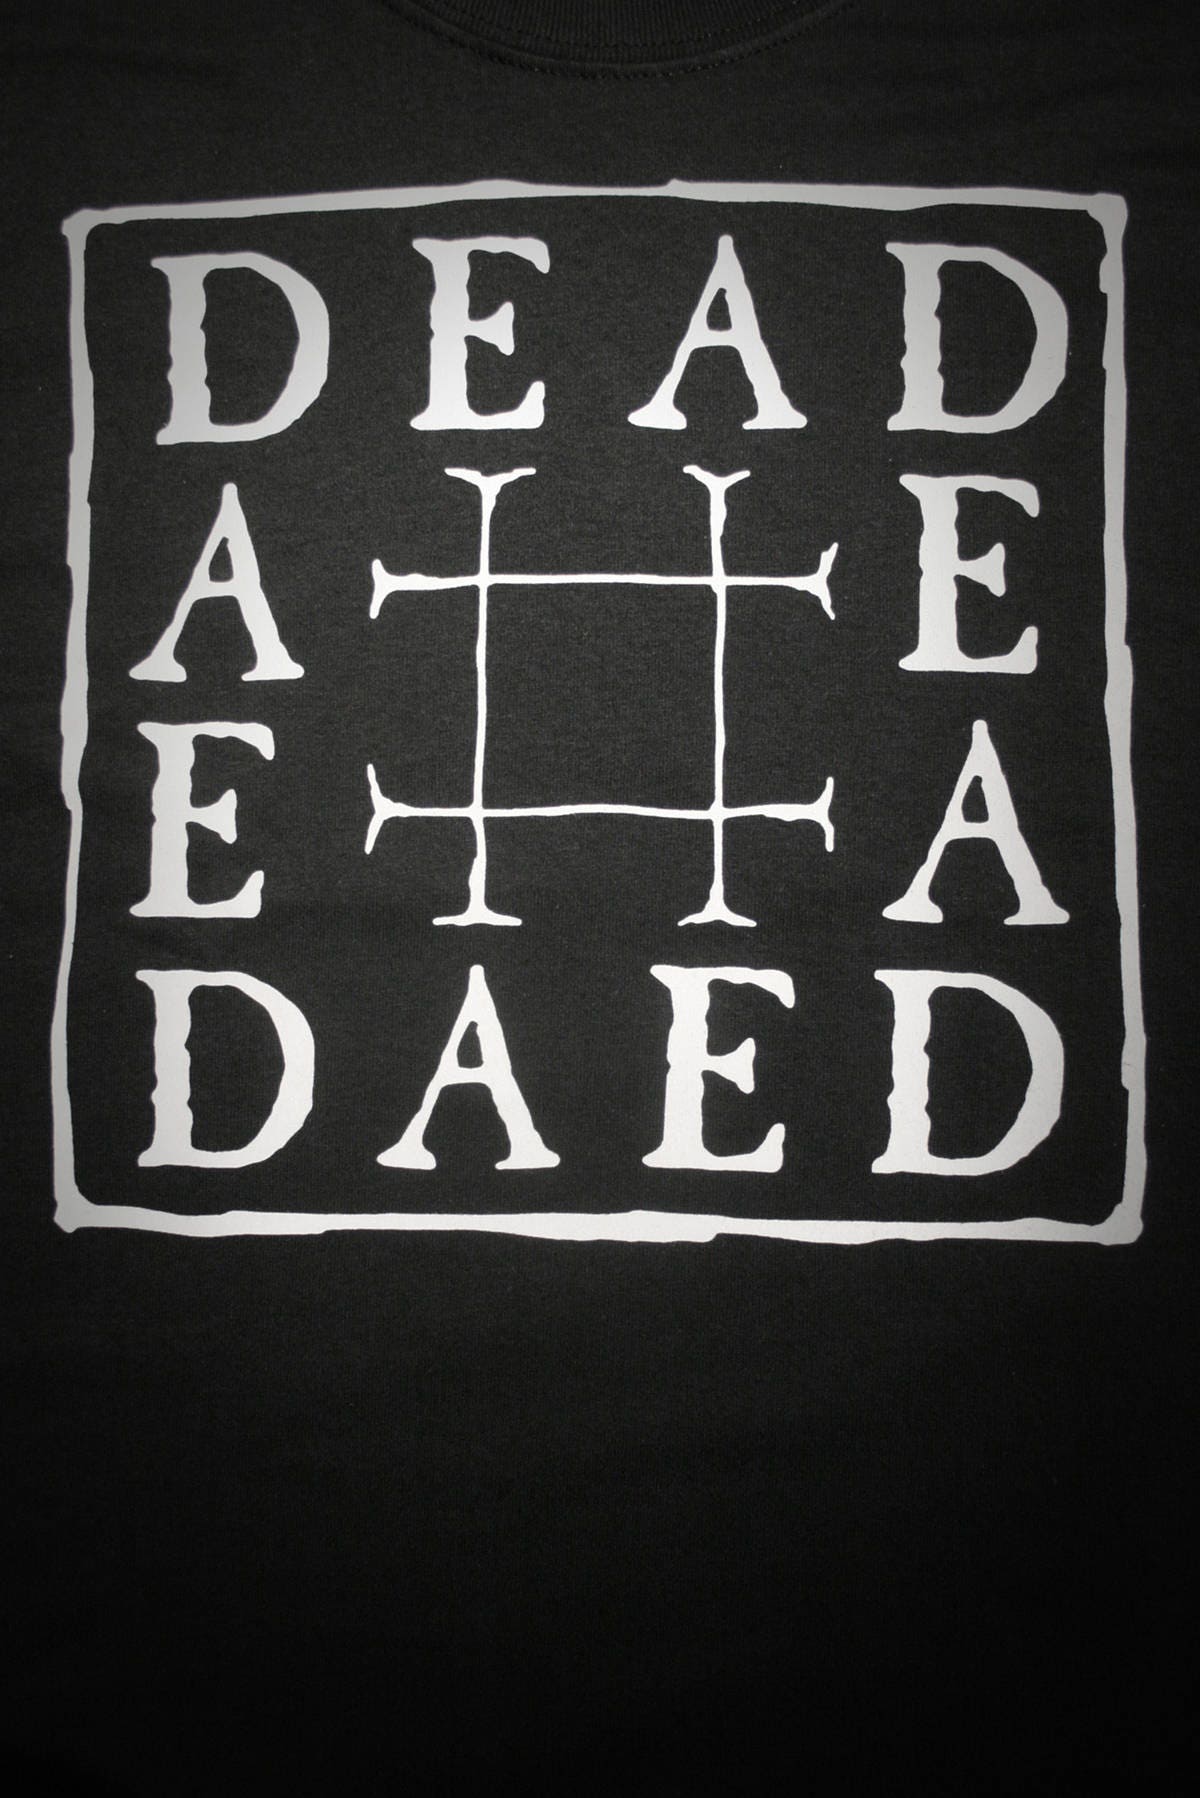 DEAD - DAED - T-shirt female fitted